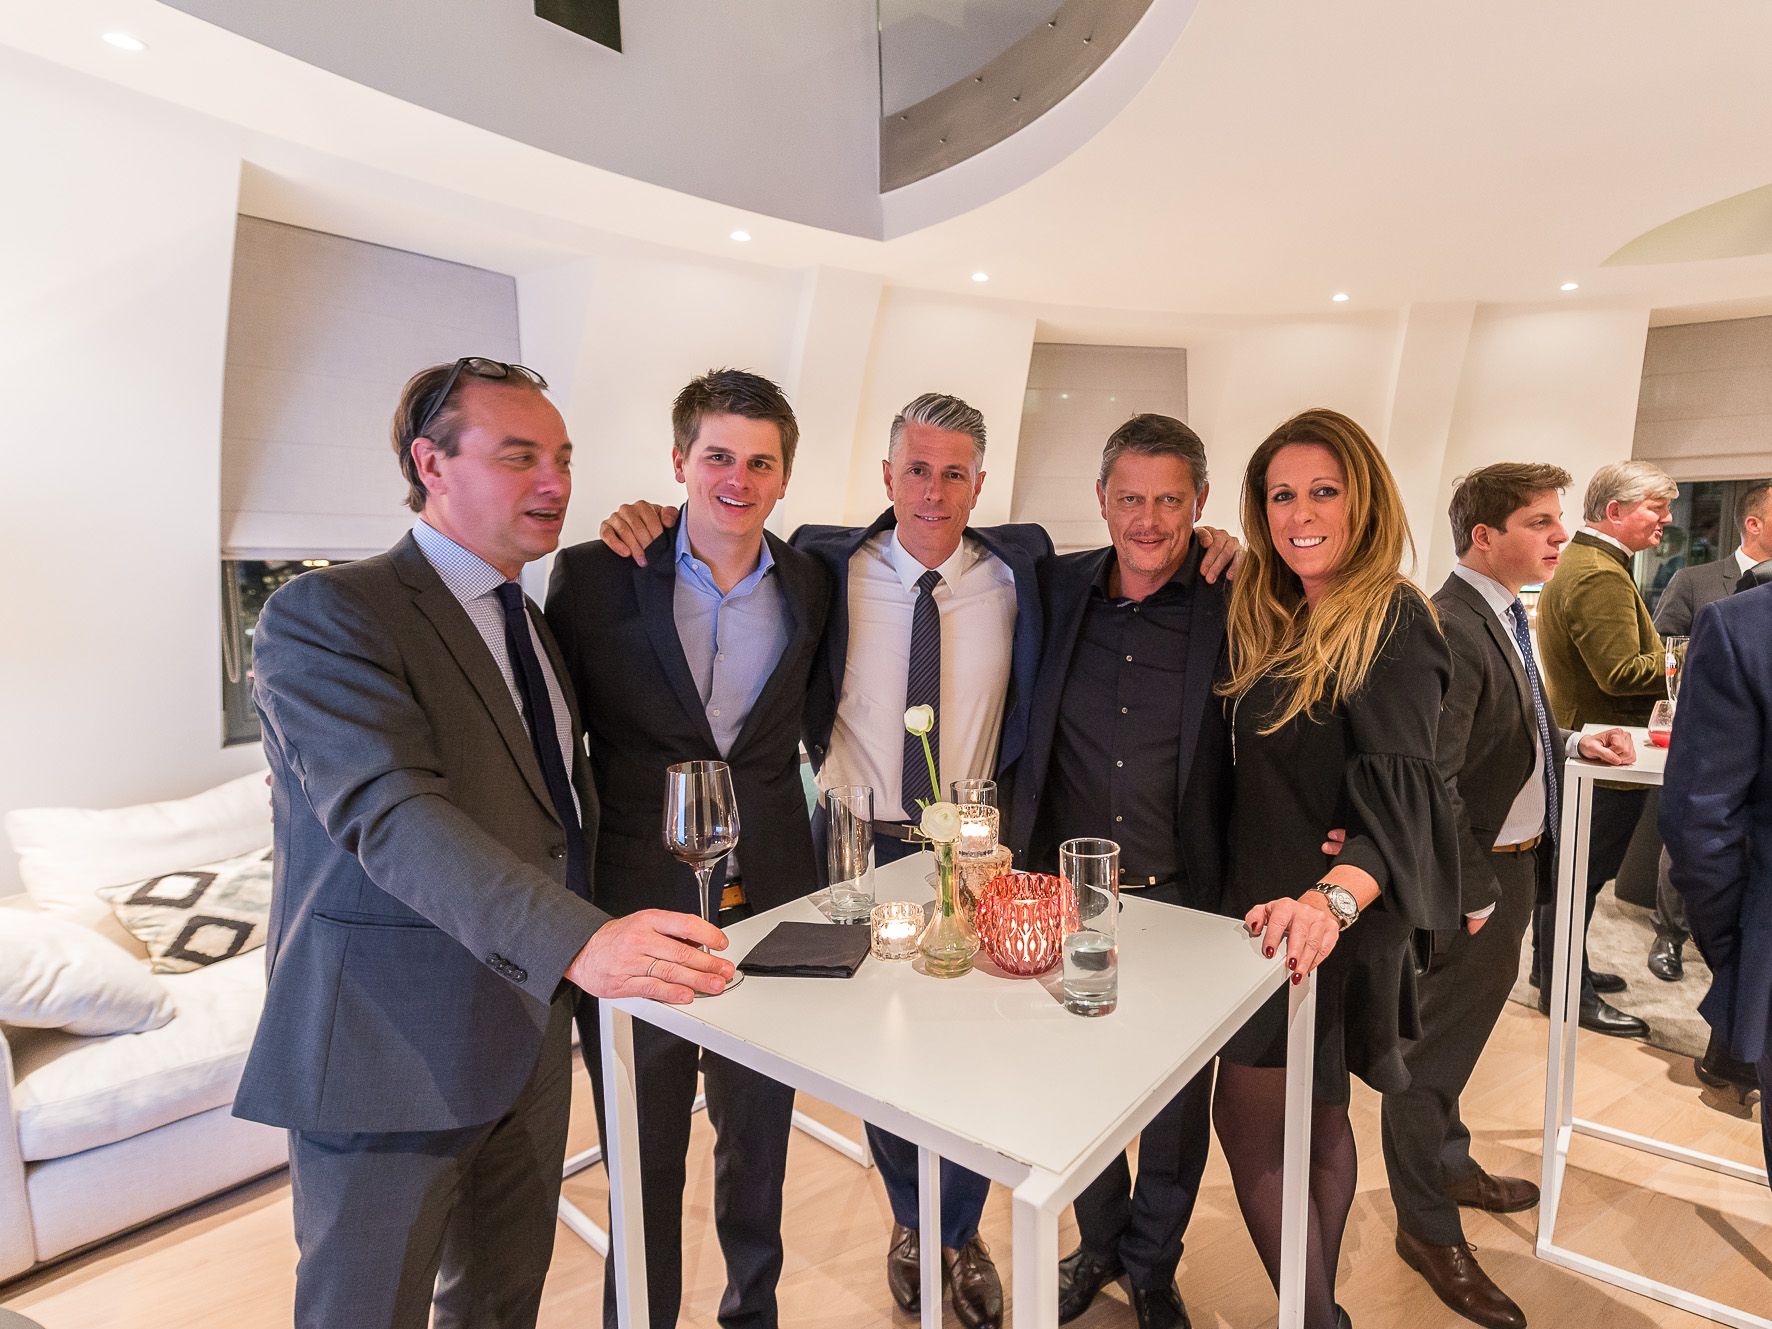 Belgium Sothebys Int. Realty Dining Over Brussels NL